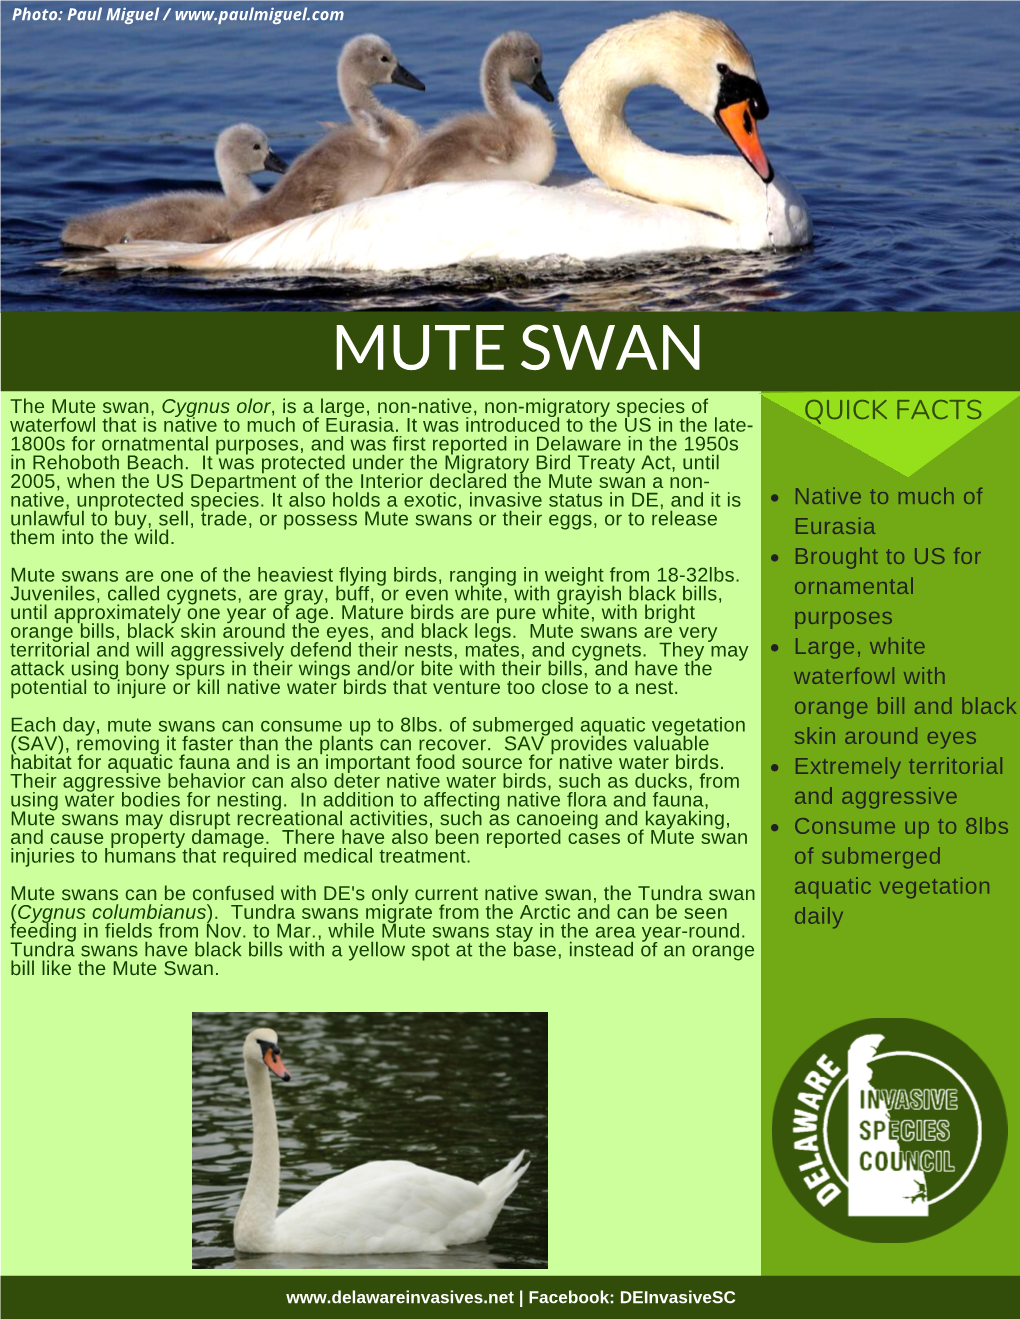 MUTE SWAN the Mute Swan, Cygnus Olor, Is a Large, Non-Native, Non-Migratory Species of Waterfowl That Is Native to Much of Eurasia